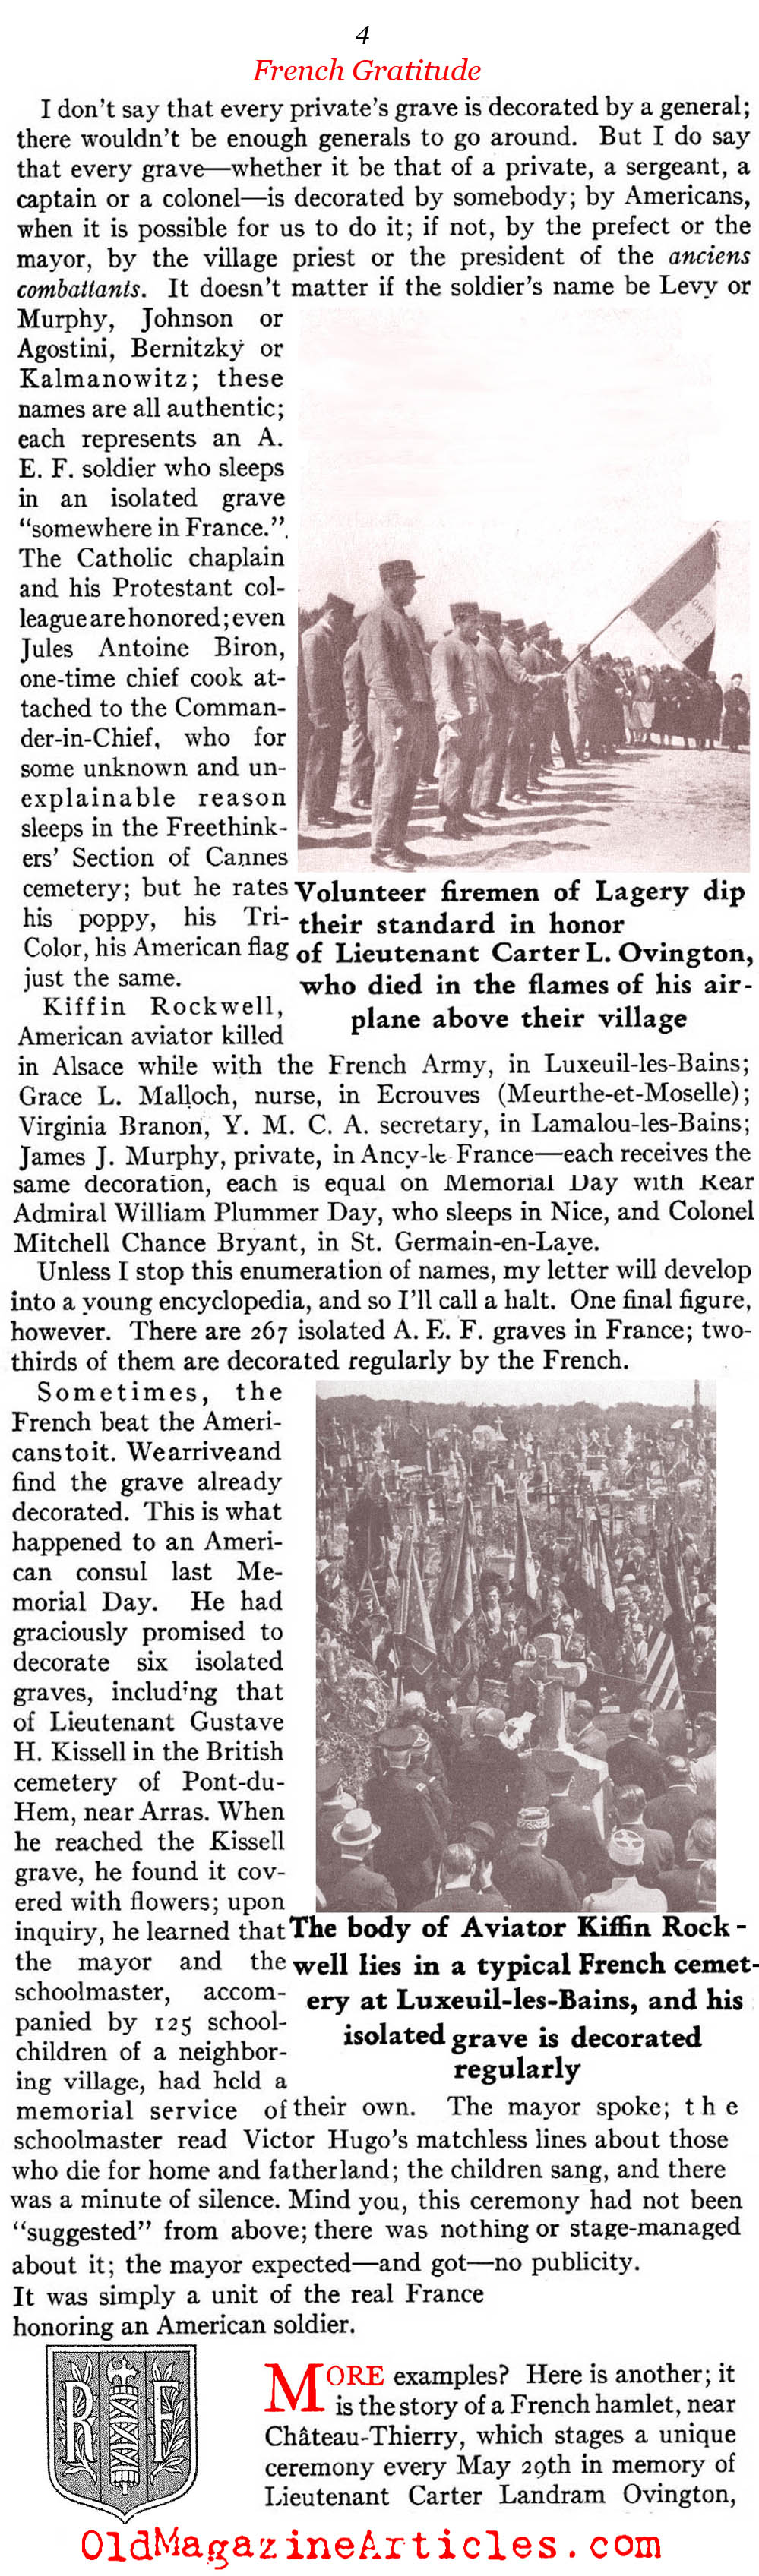 American W.W. I  Cemeteries and  French Gratitude (American Legion Monthly, 1936)